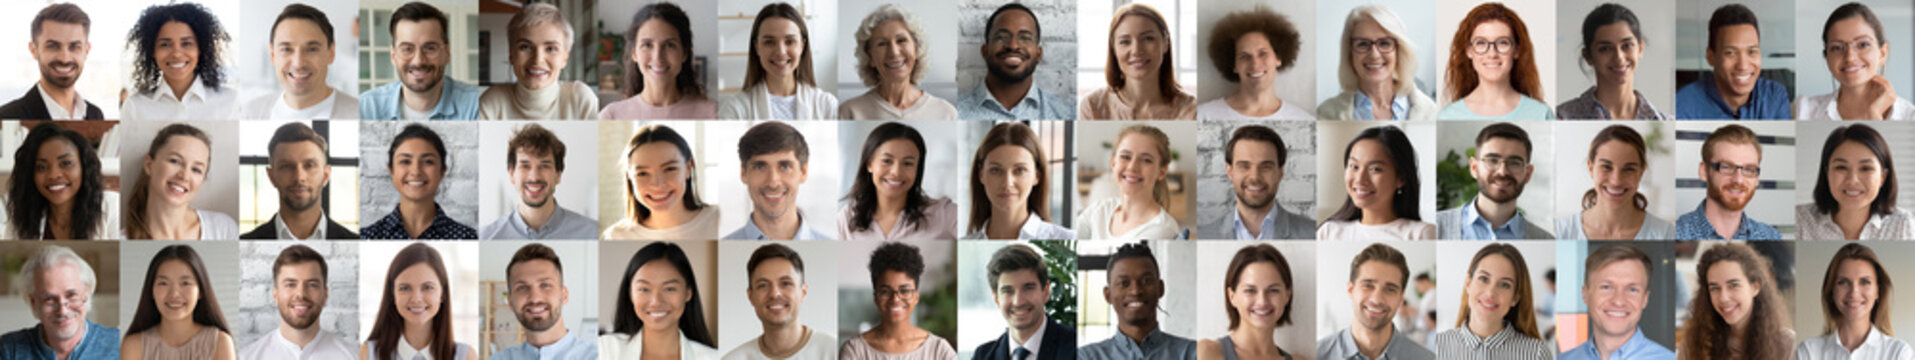 Many smiling multiethnic people faces headshots collage mosaic. Lot of young and old adult diverse ethnicity professional people group looking at camera. Horizontal banner for website header design